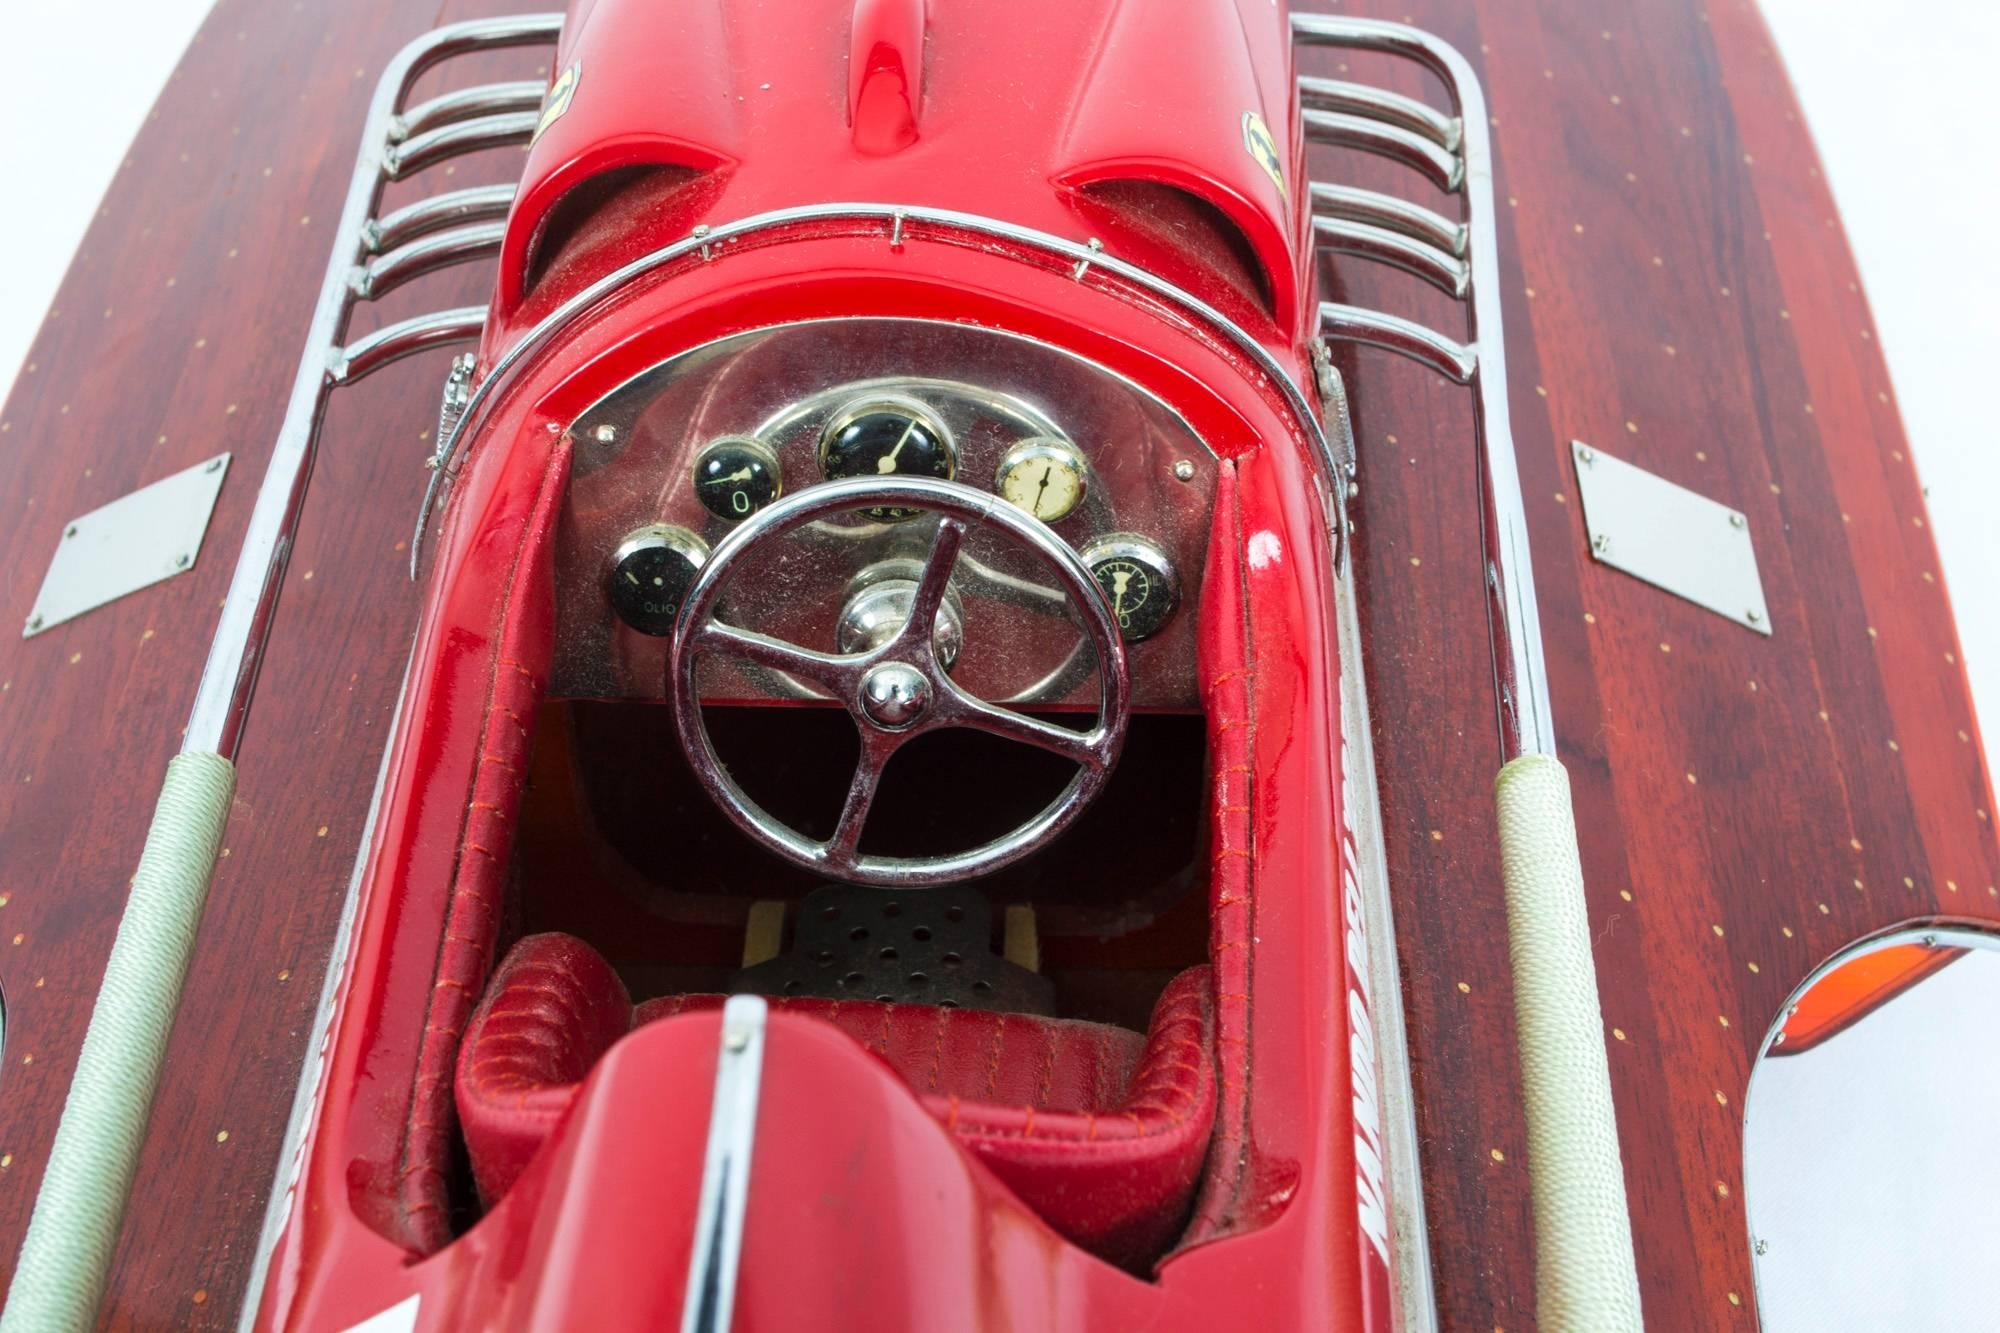 This is a superb Vintage model of a Ferrari Hydroplane, 1954. Its cars are adored on all corners of the globe and are seen as the ultimate status symbol for the rich and powerful.

But as these incredible pictures show, Ferrari is not just a